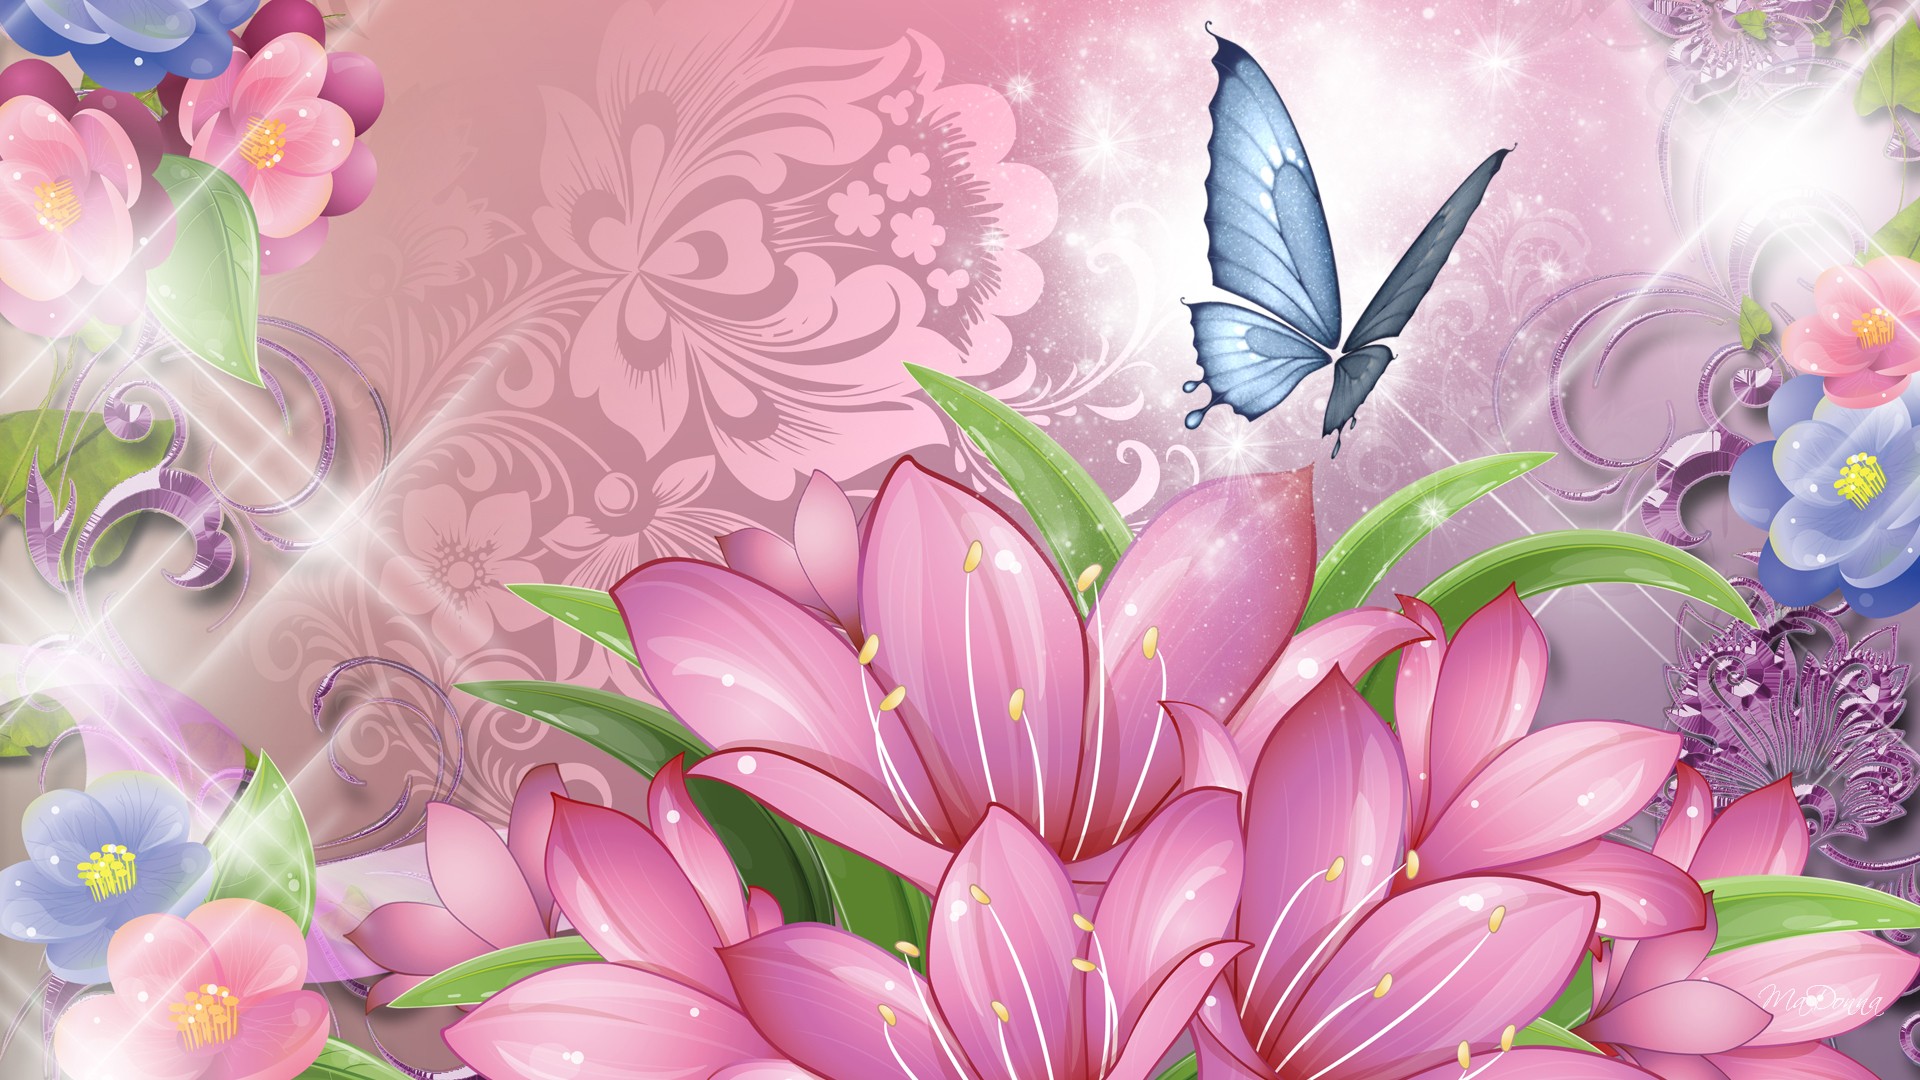 Gallery For gt Pink Butterflies And Flowers Wallpaper